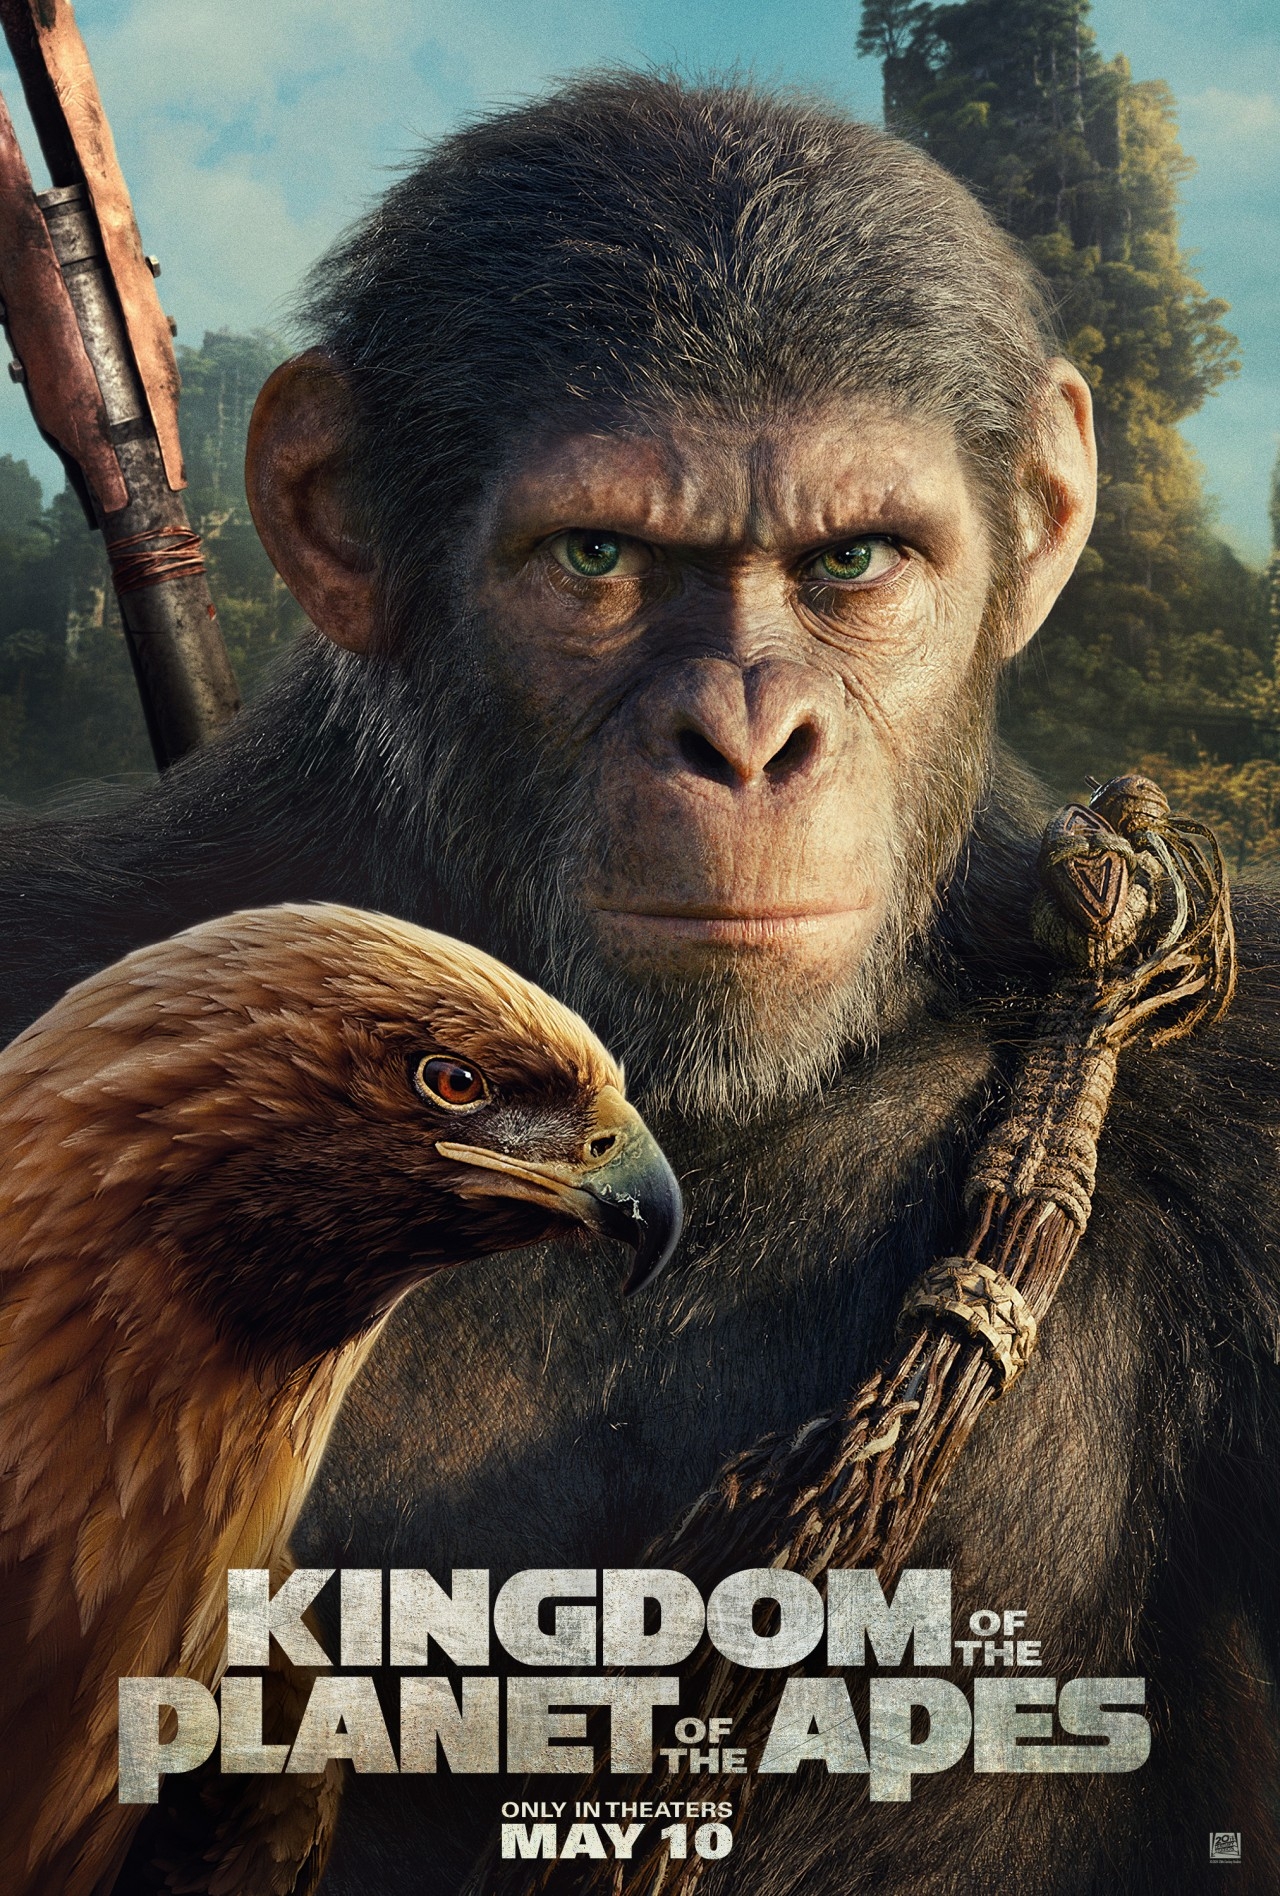 New Trailer Drops for ‘Kingdom of the of the Apes’ Animation